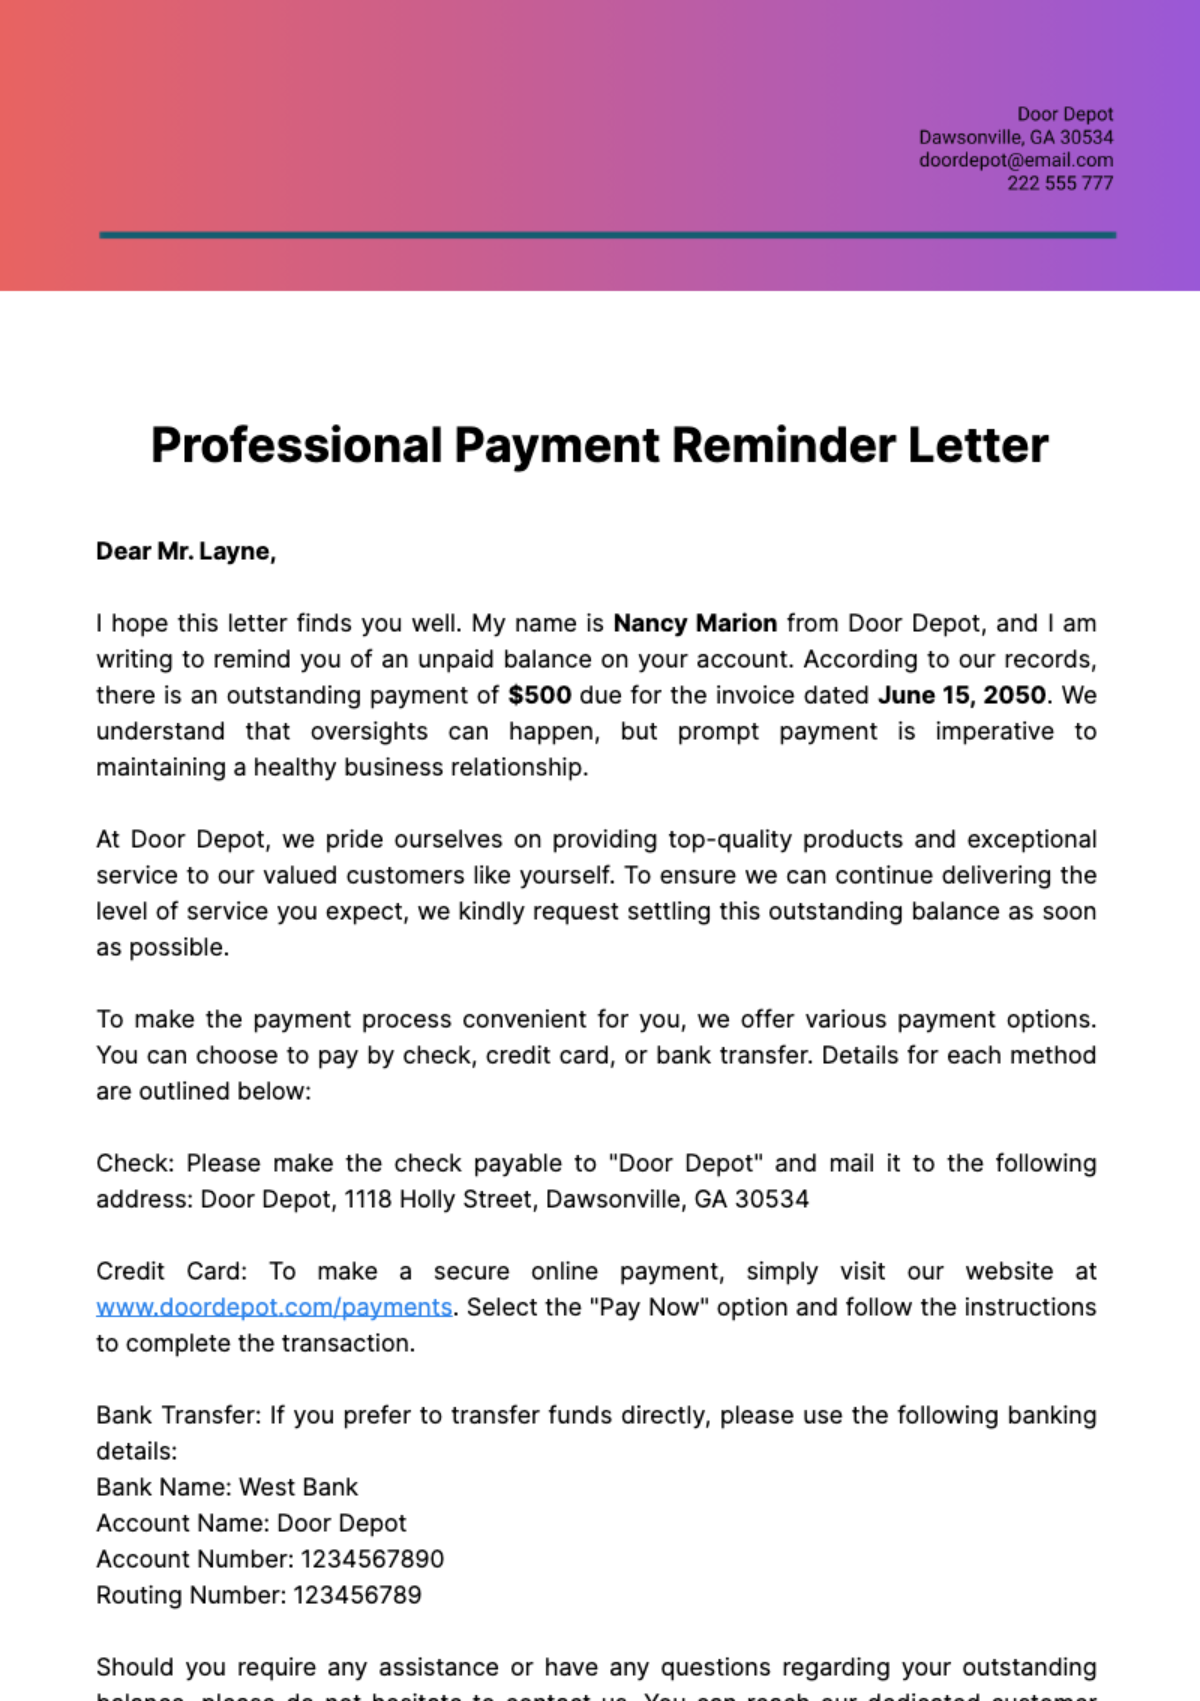 Professional Payment Reminder Letter Template